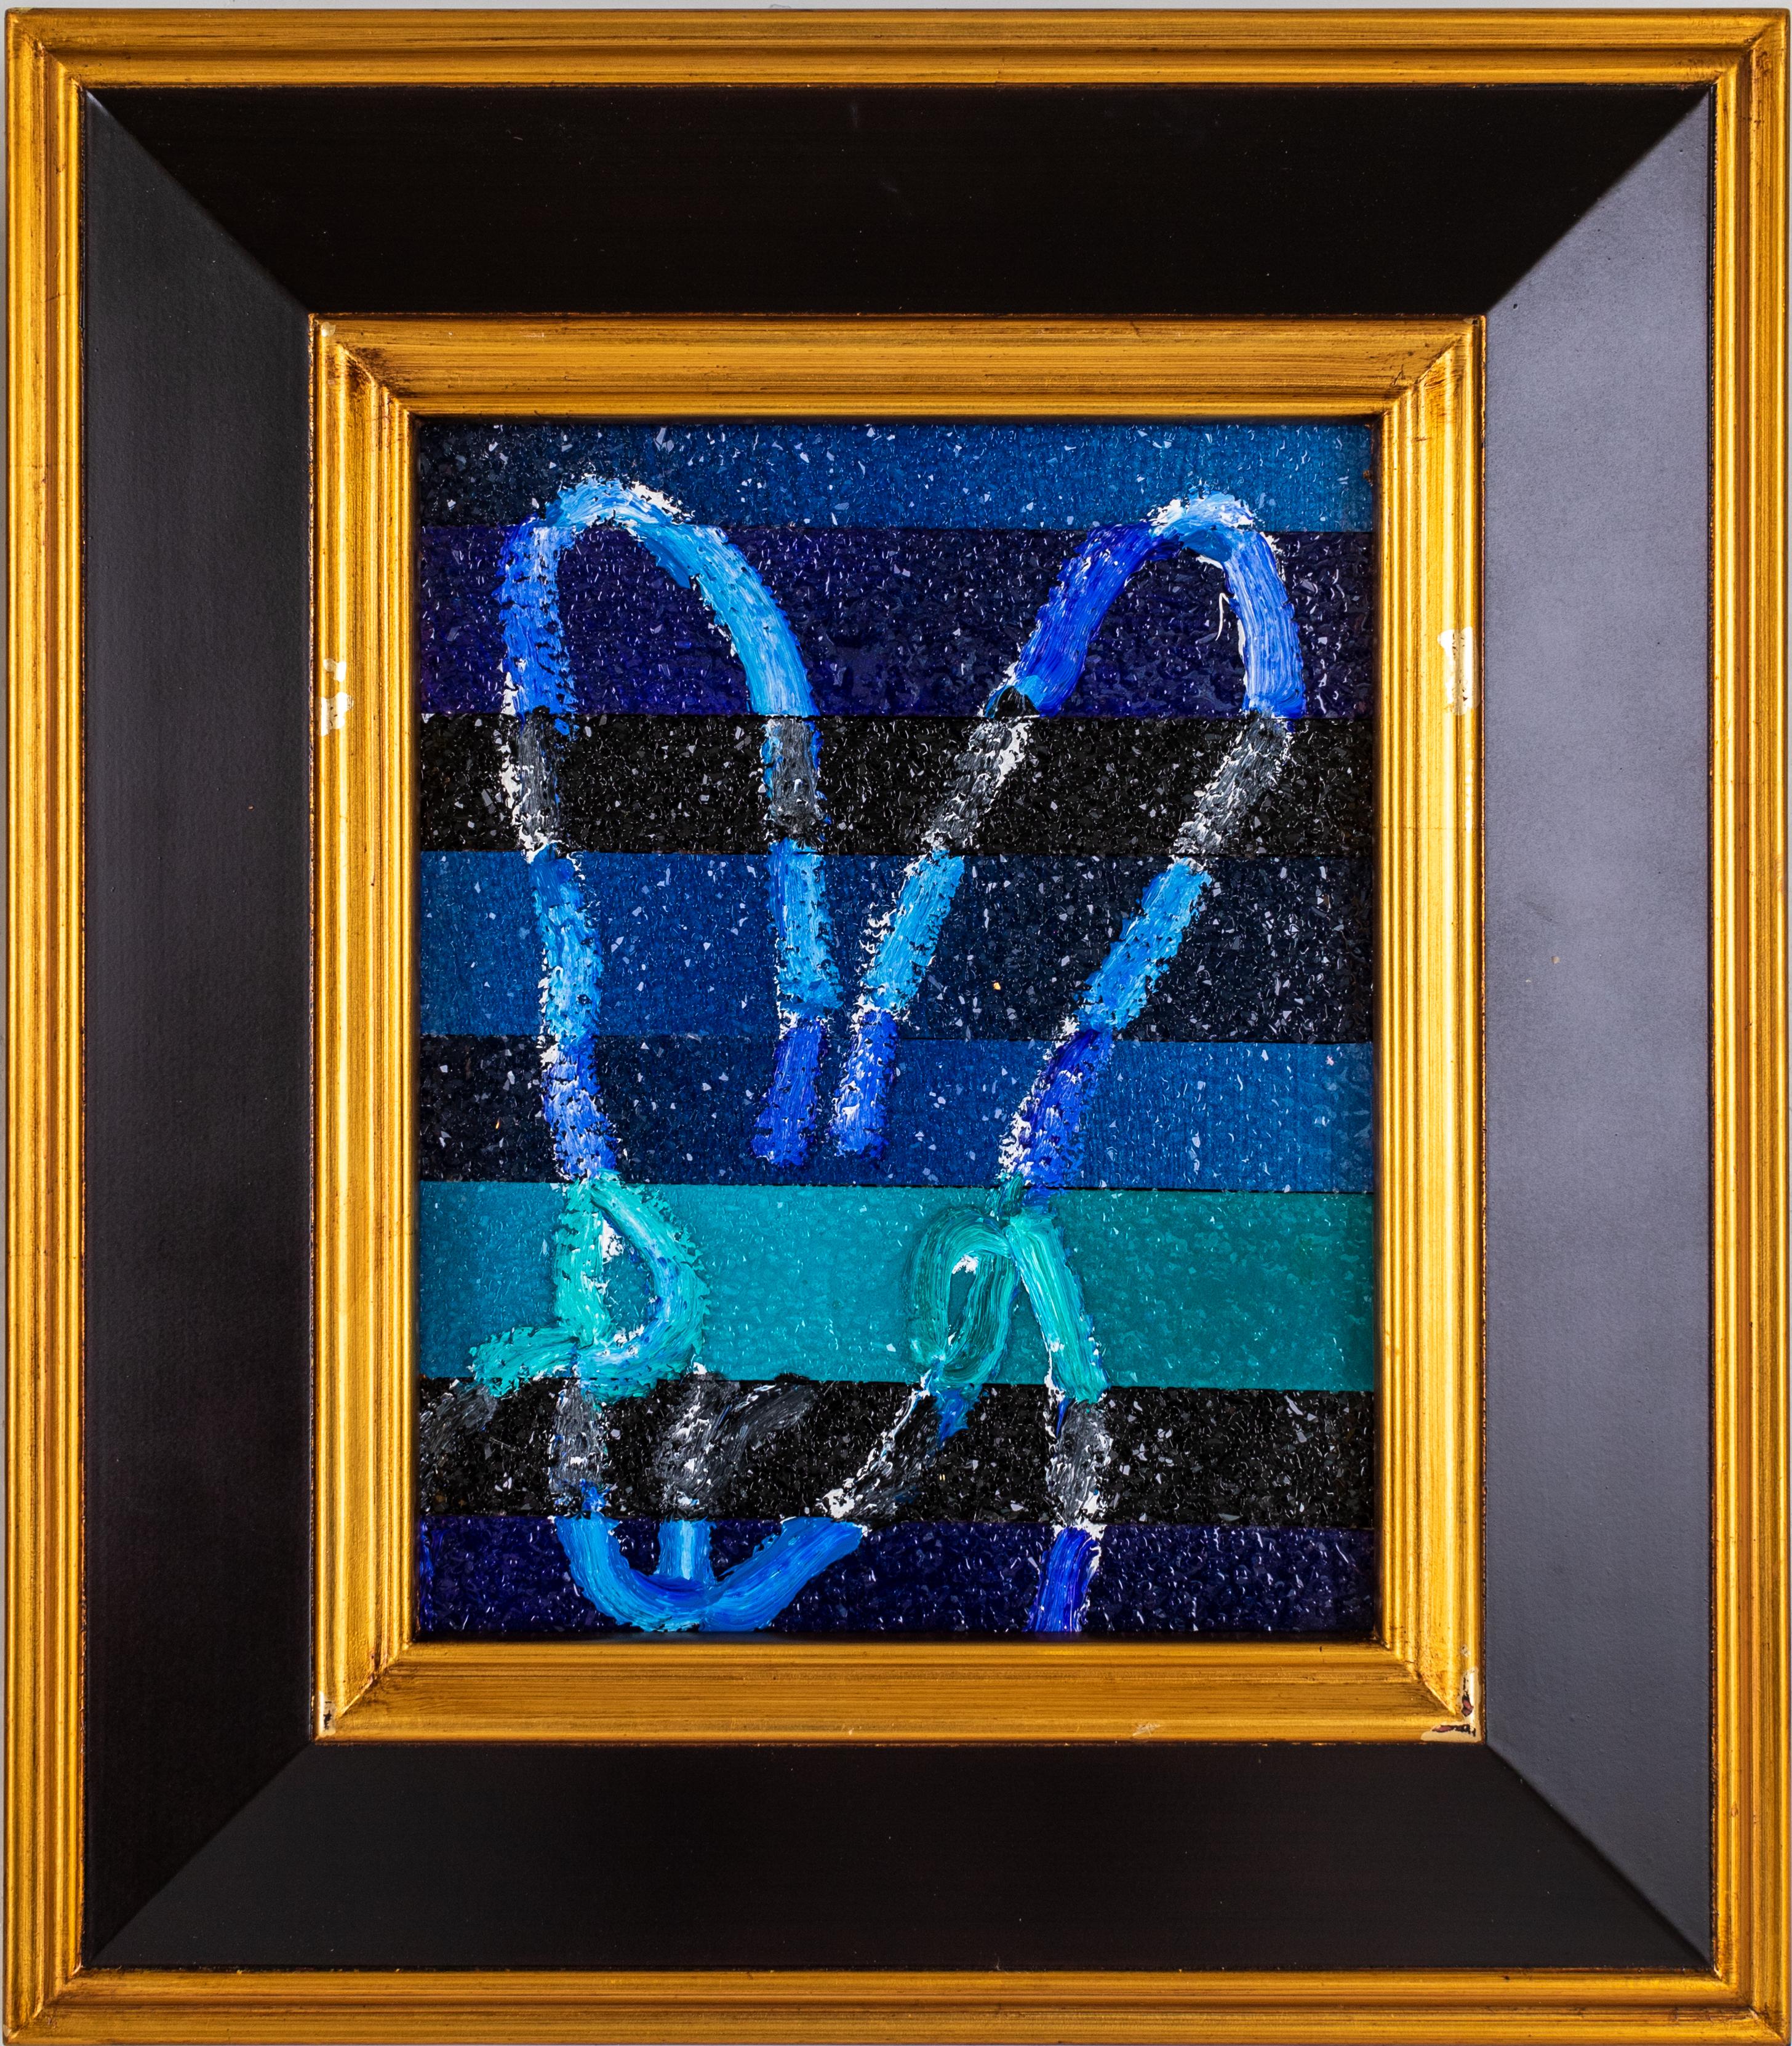 Hunt Slonem "Banded 1" Stripe Bunny
Diamond dust bunny painted over different cuts of diamond dust wood in an antique frame

Unframed: 10 x 8 inches  
Framed: 16.5 x 14.5 inches
*Painting is framed - Please note that not all Hunt Slonem frames are